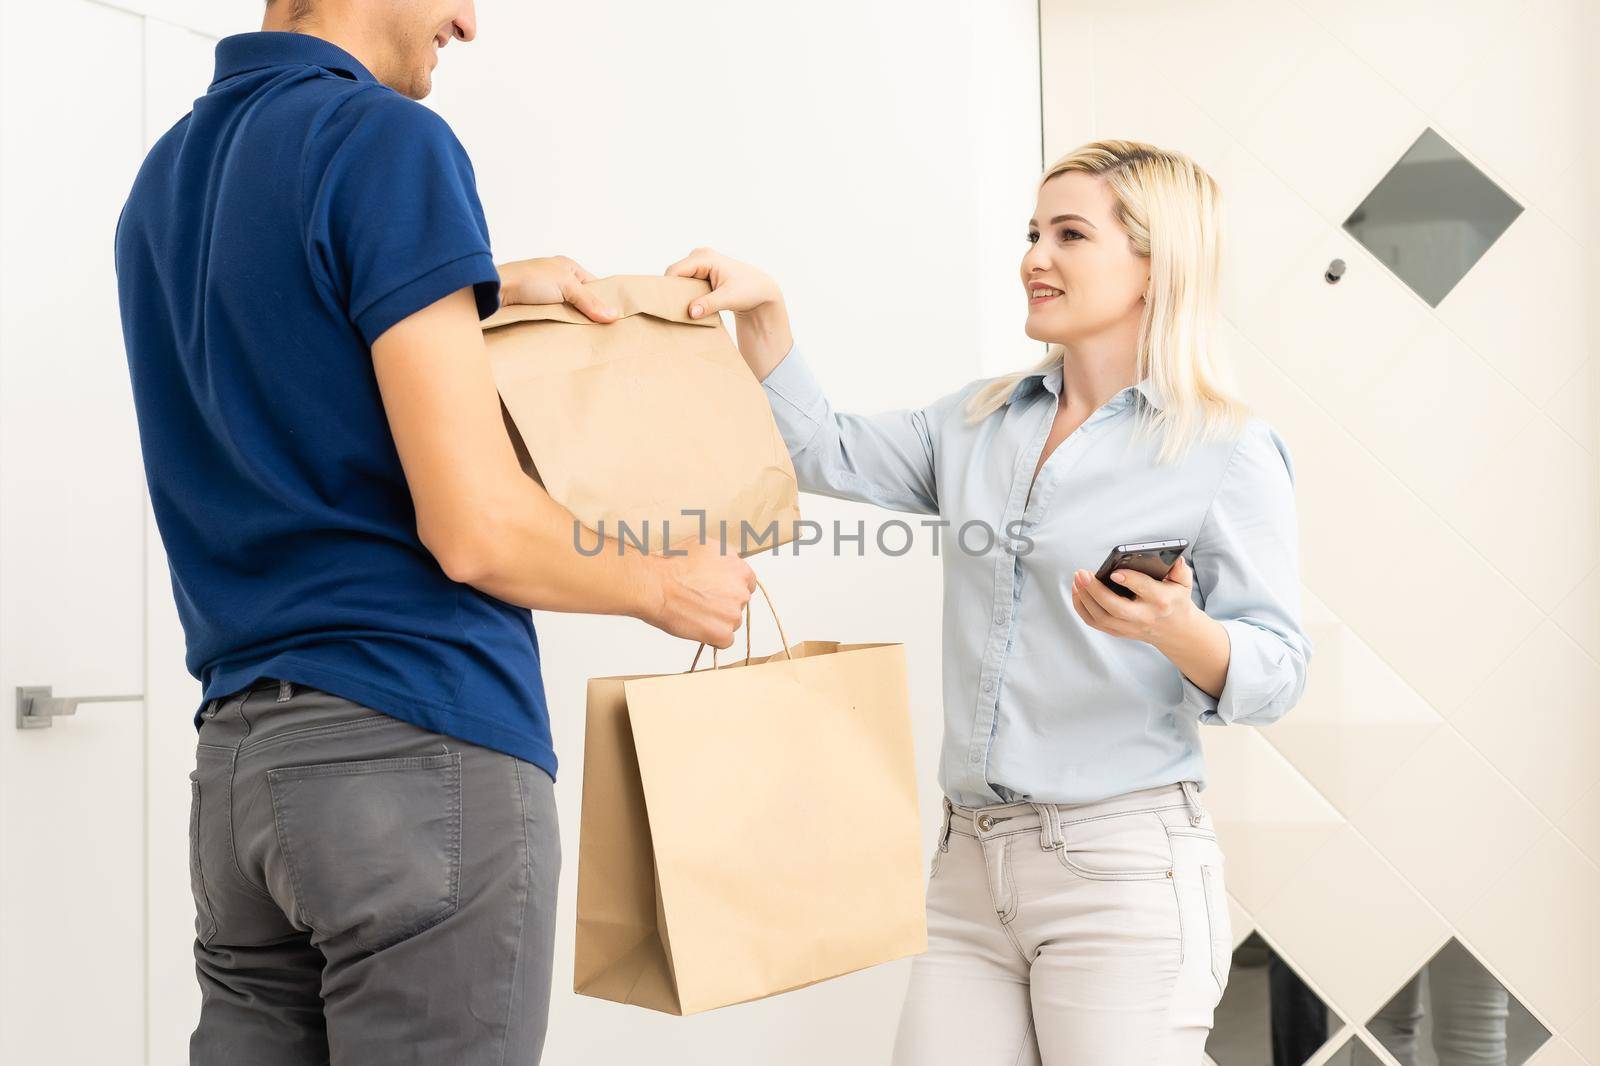 Woman and courier during order transfer. Woman accepting delivery from deliveryman. Cropped image of delivery service worker giving parcel to client.